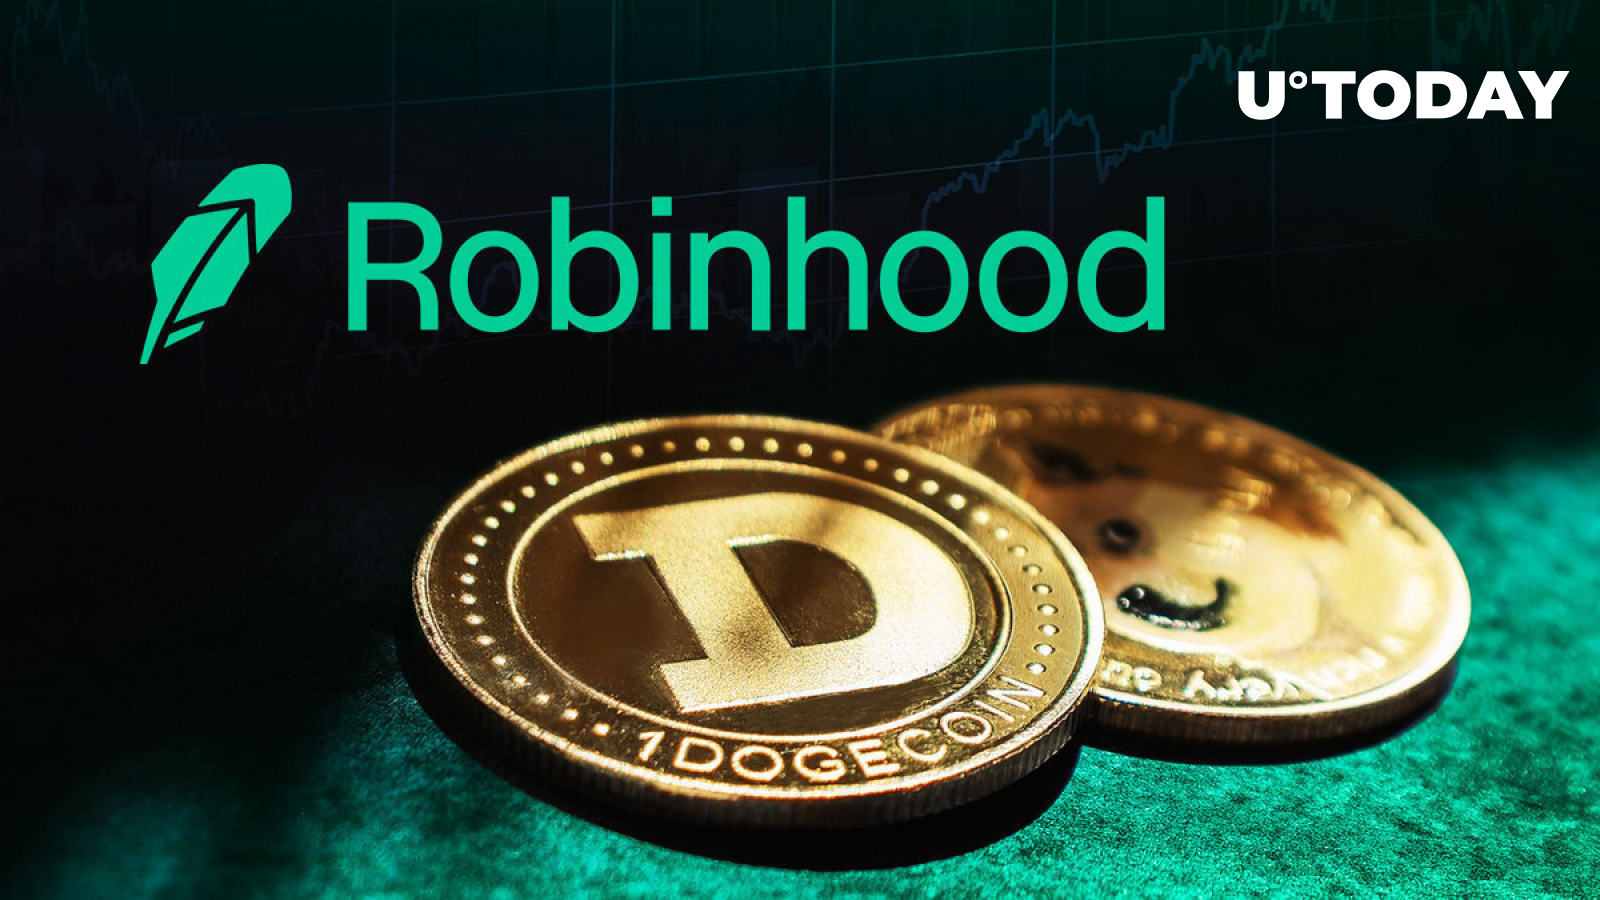 250 Million Dogecoin Transferred Out of Robinhood as DOGE Price About to Explode